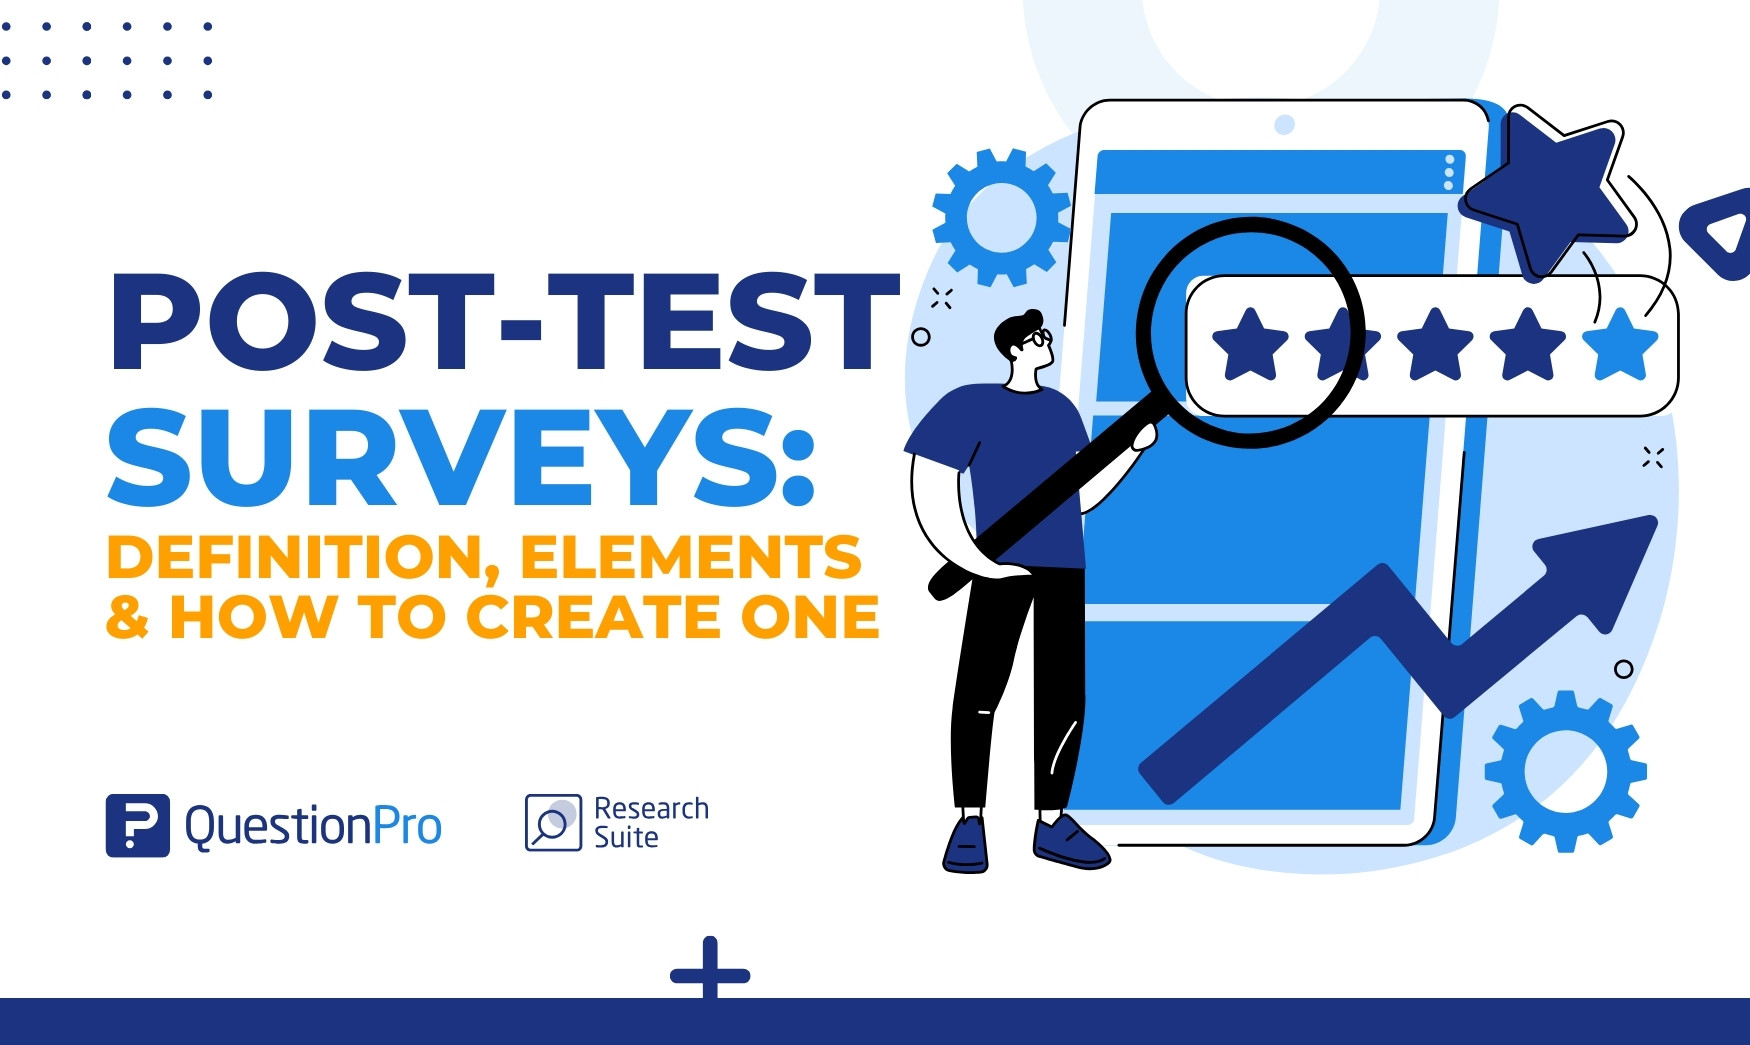 Companies use post-test surveys to learn how well their products or services are doing. Figure out what's working and what needs improvement.